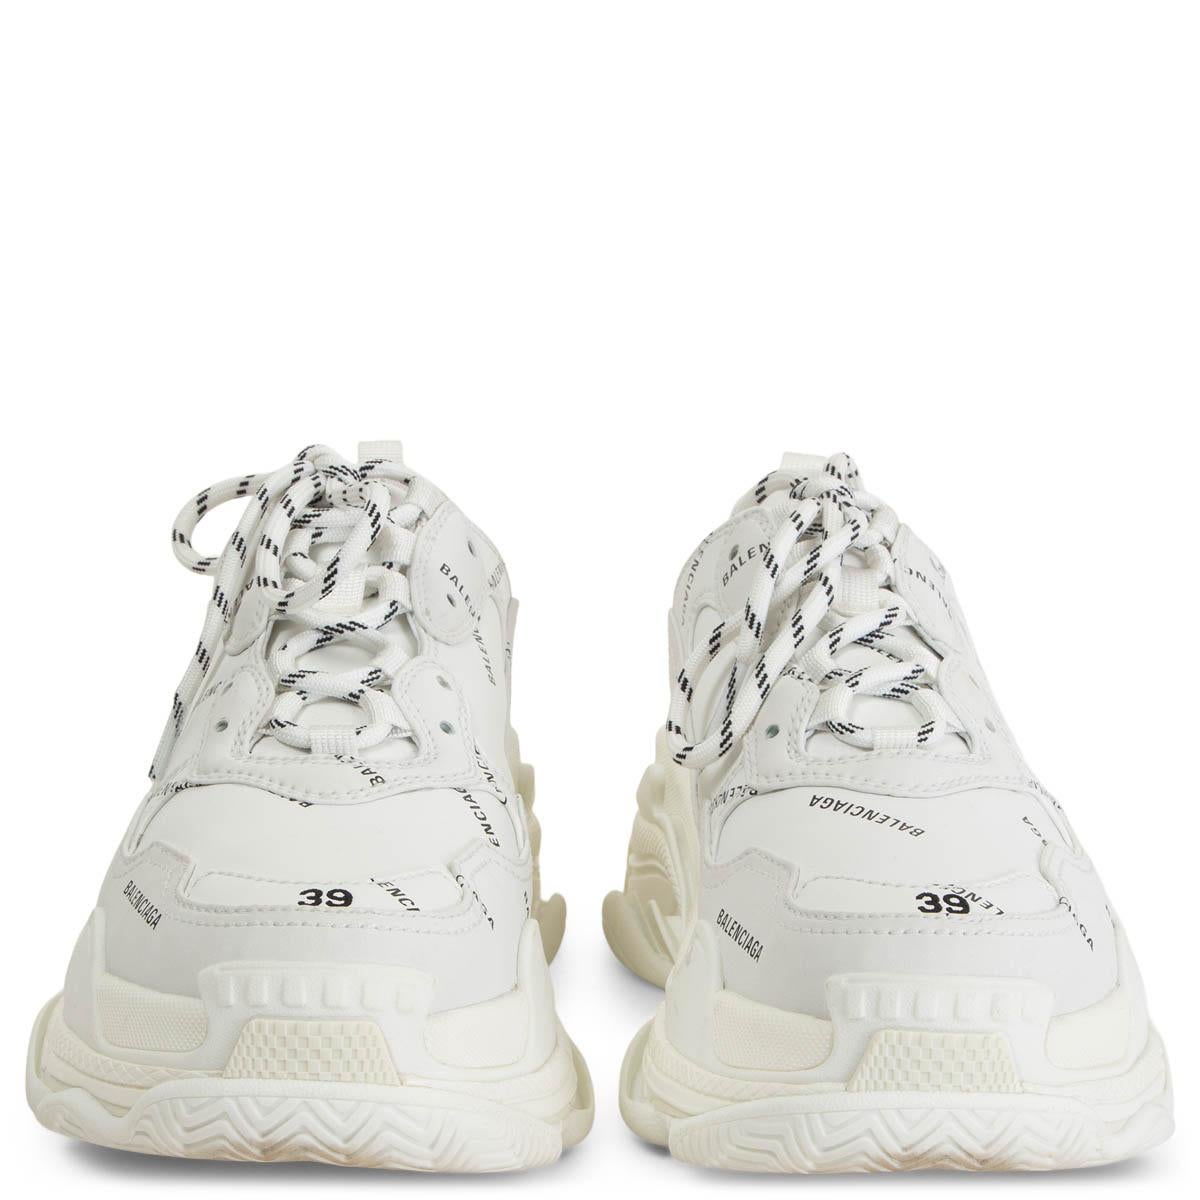 100% authentic Balenciaga All-Over Logo Triple S Sneaker in white faux leather, double foam and mesh. Allover logo printed. Embroidered size at the edge of the toe and embroidered logo on the side. Triple S rubber branding on the tongue. Back